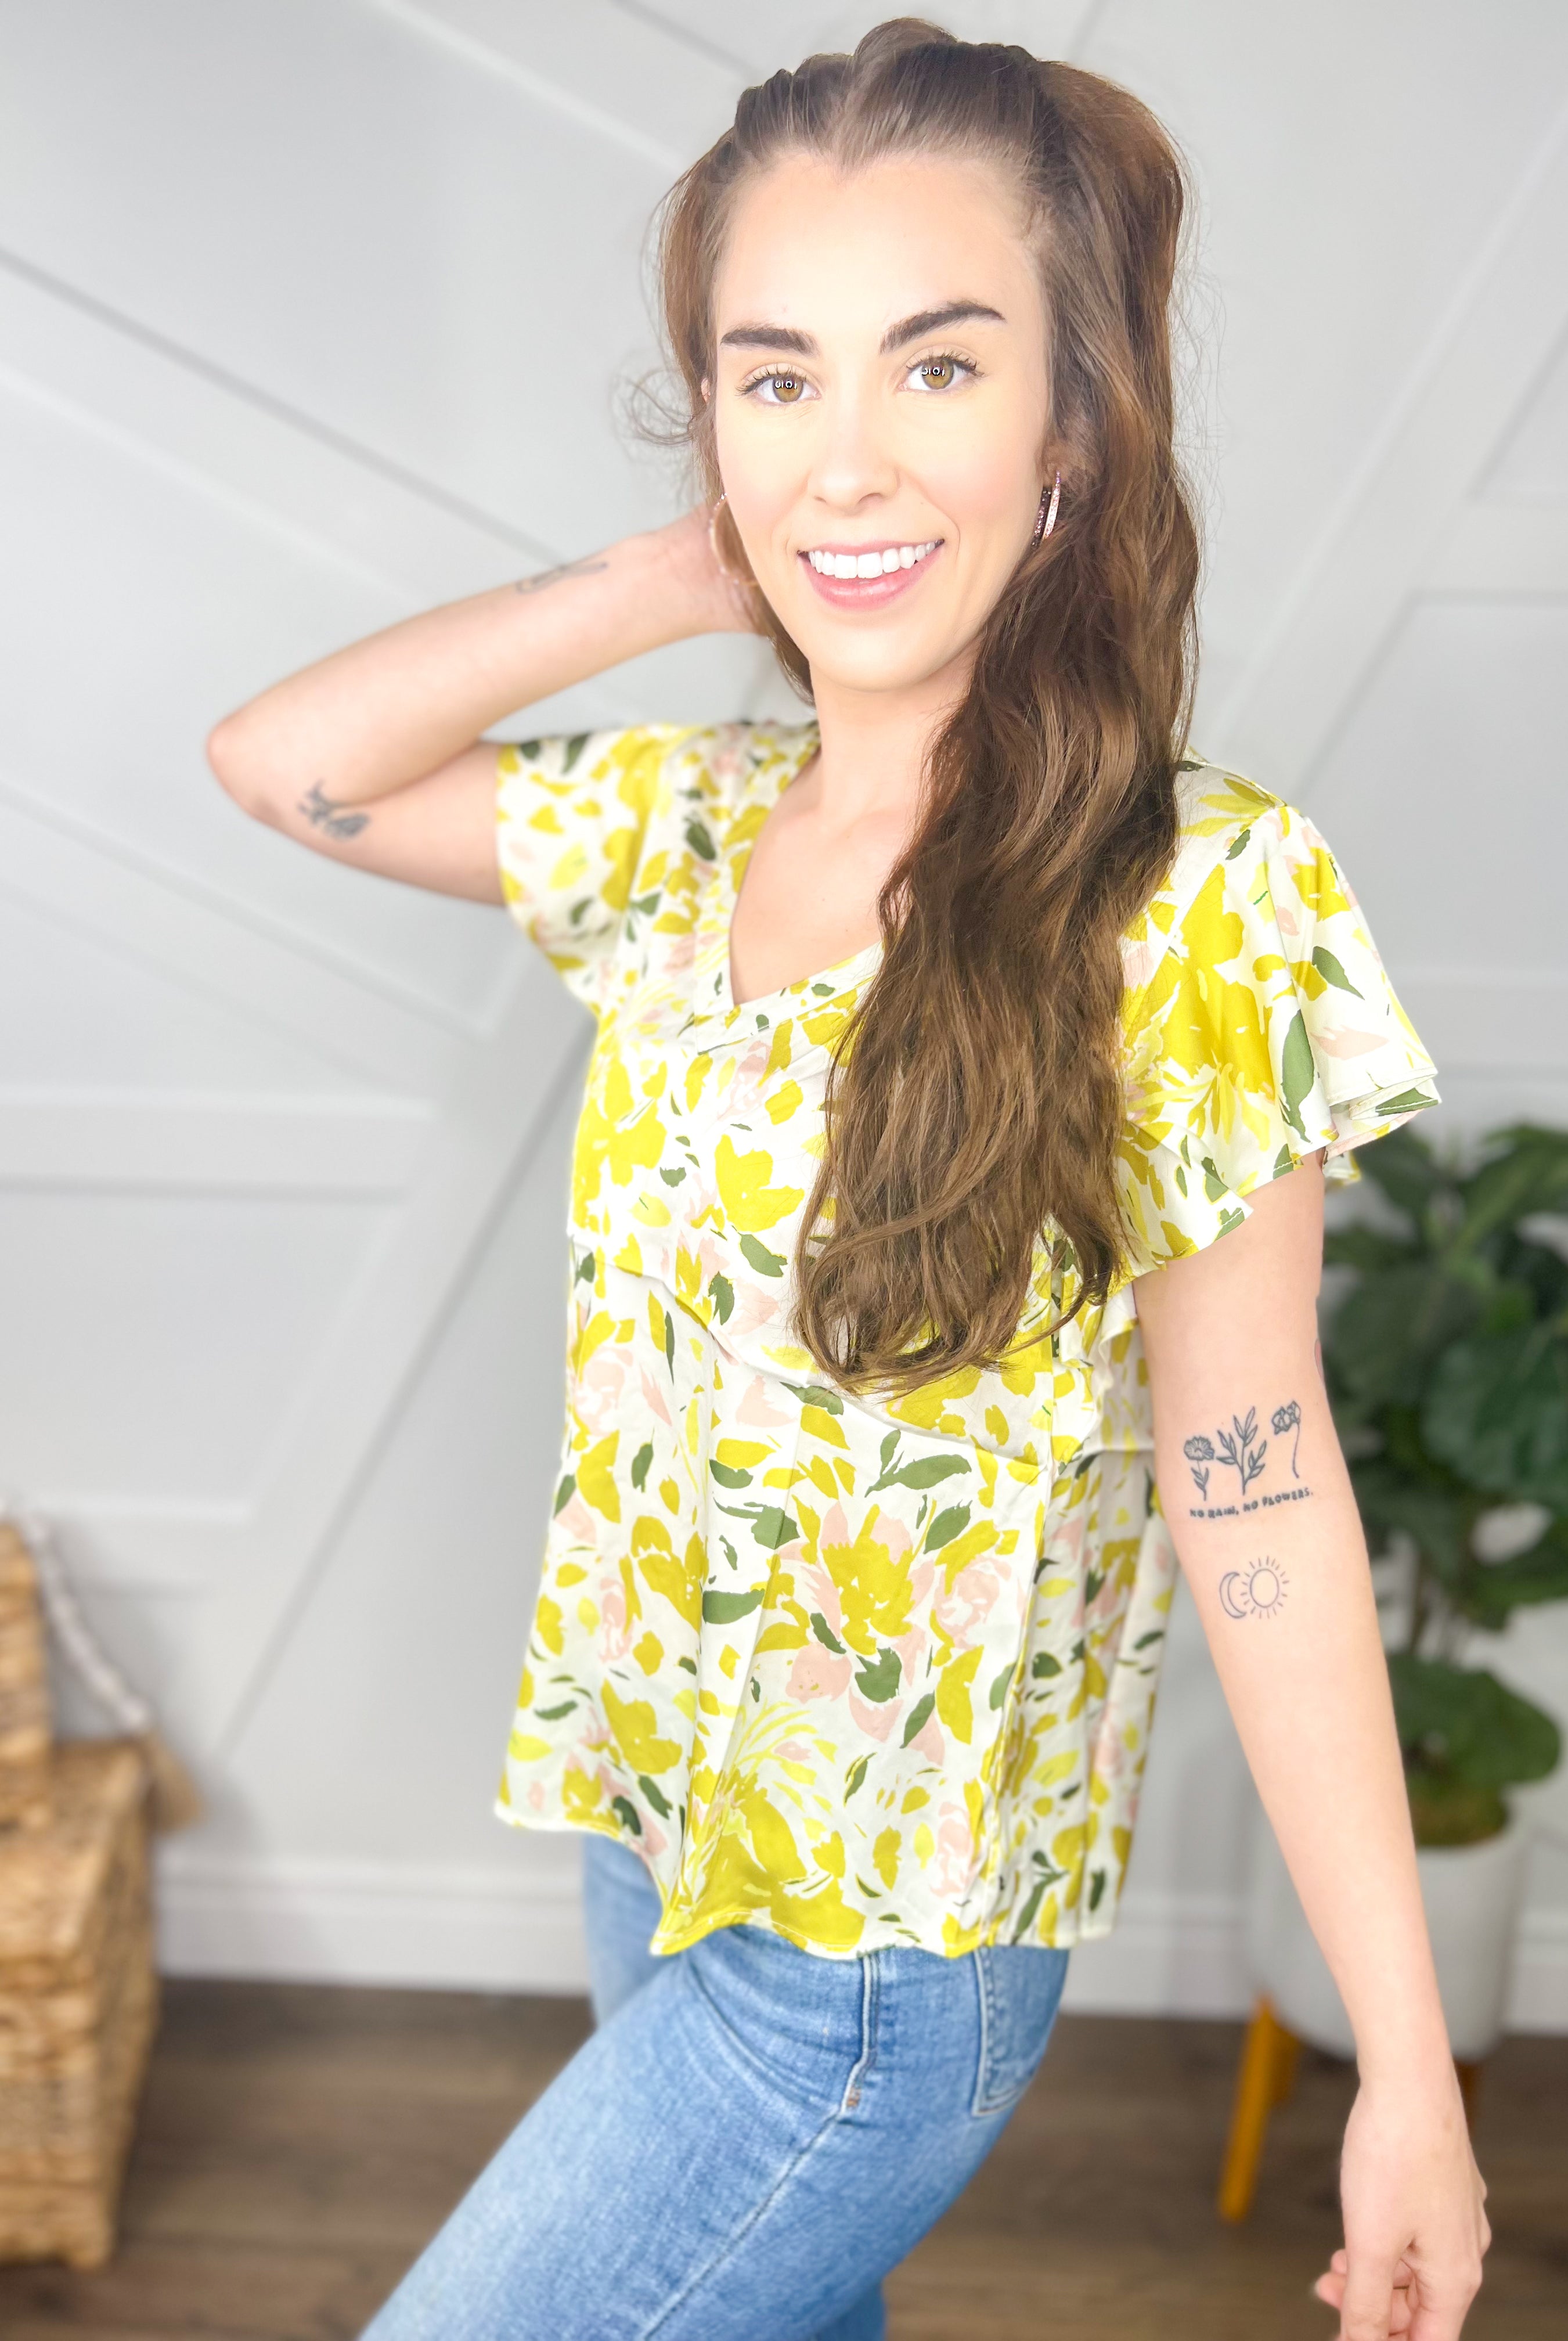 Extra Sweetness Top-110 Short Sleeve Top-Kori America-Heathered Boho Boutique, Women's Fashion and Accessories in Palmetto, FL